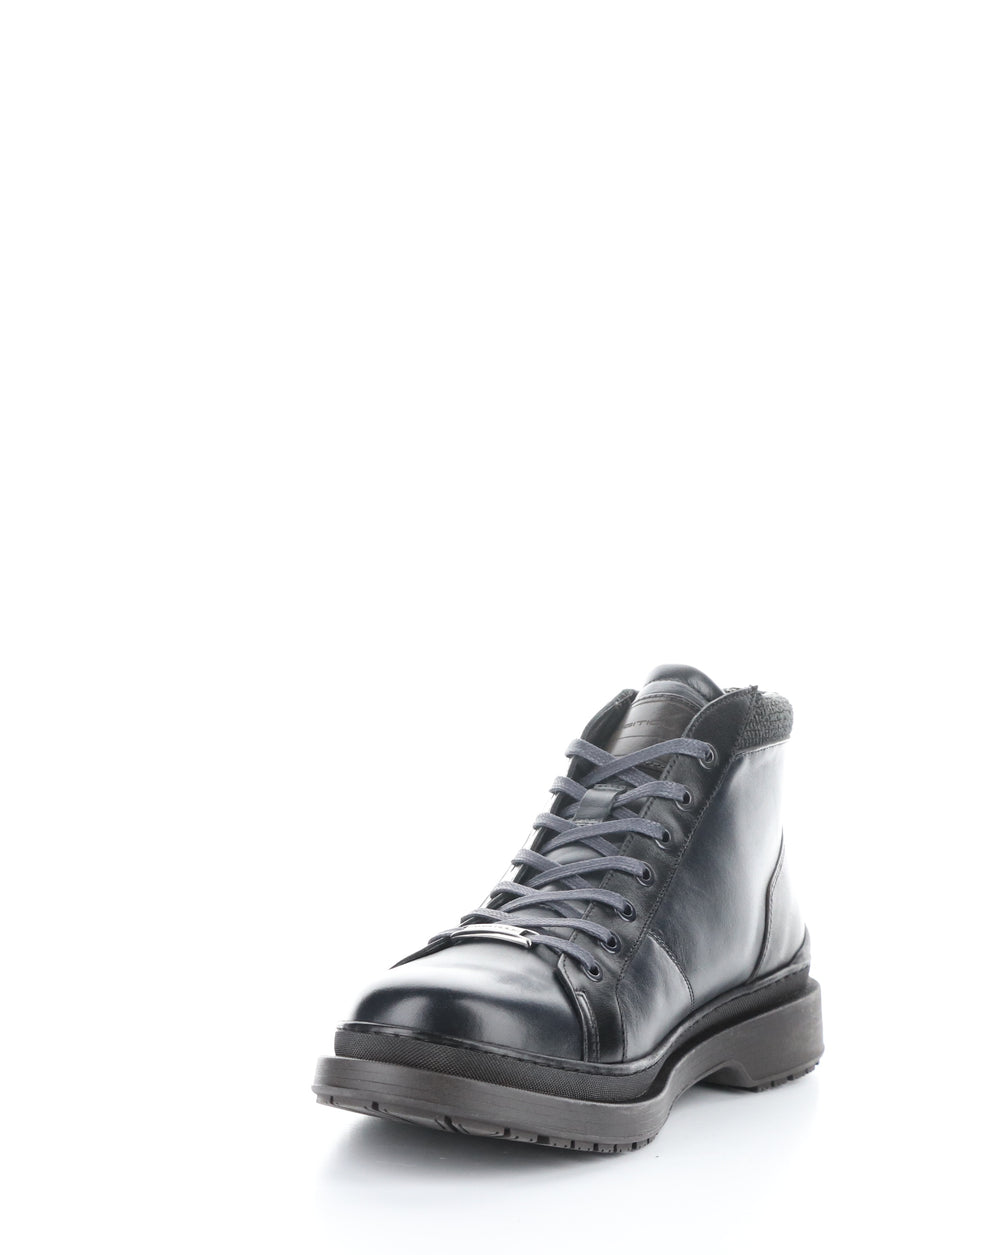 12352 GREY COMBI Lace-up Boots